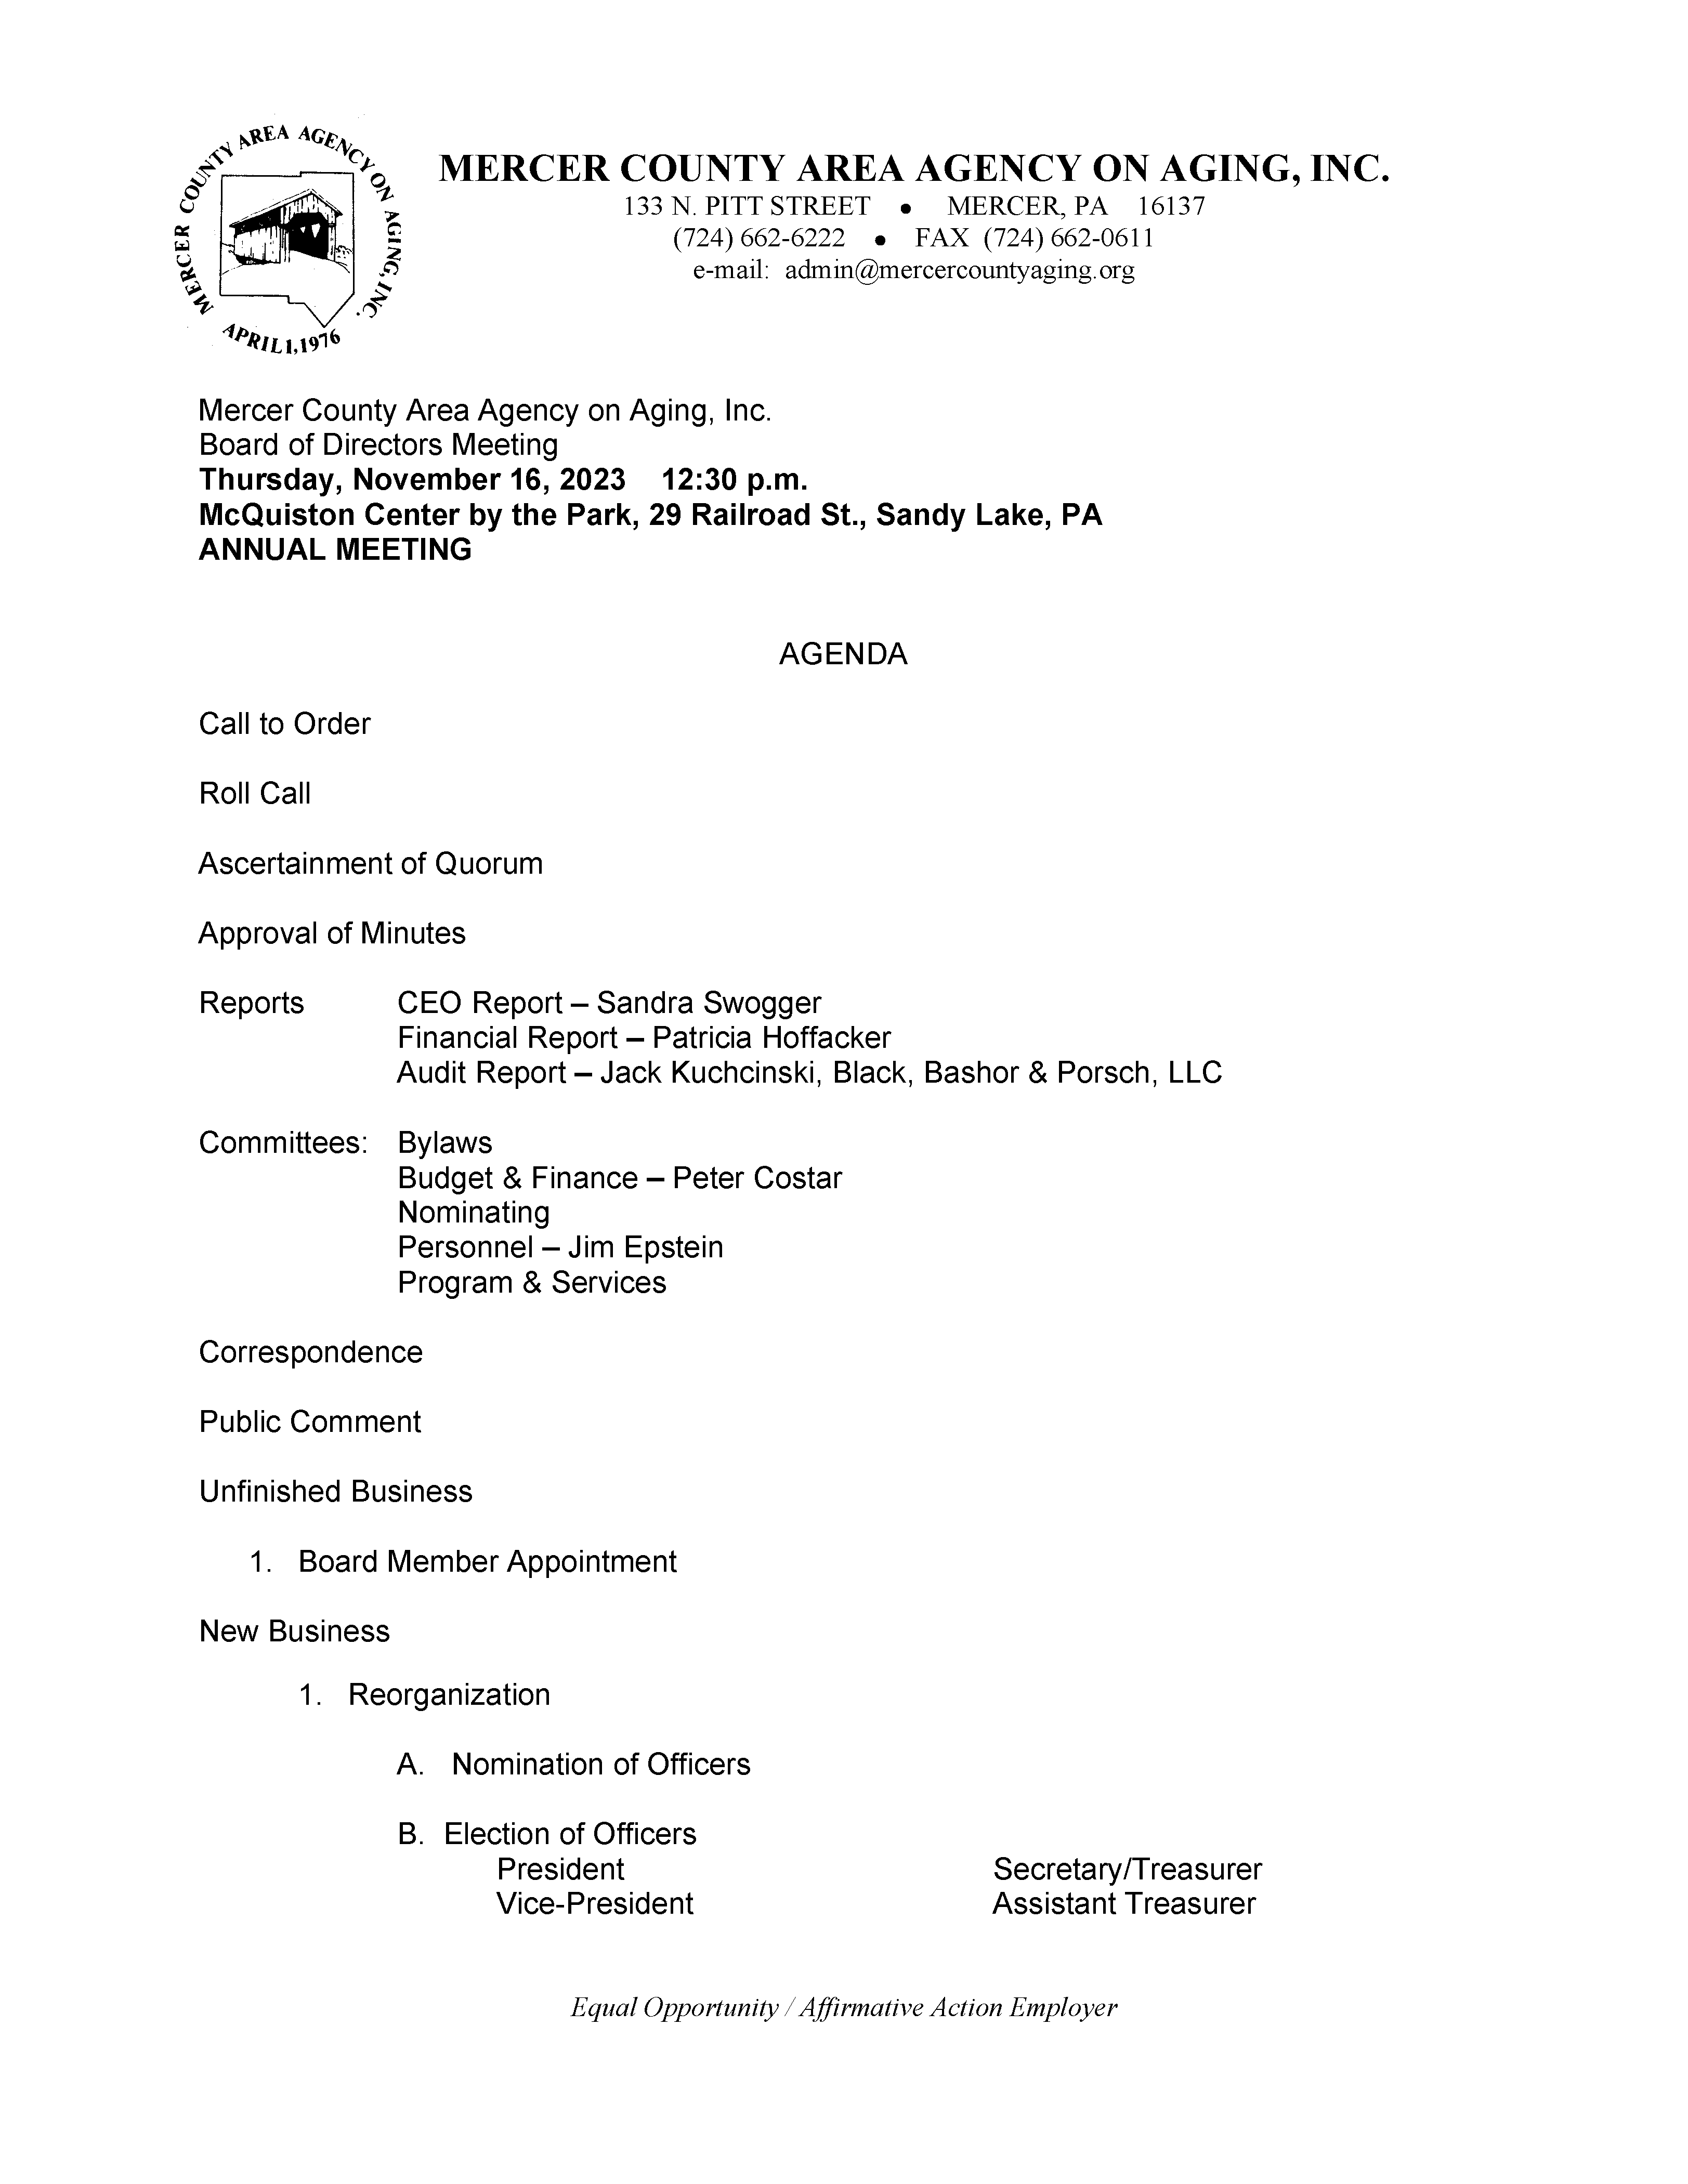 11_16_2023_Board_of_Directors_Annual_Meeting_Agenda_Page_1.png